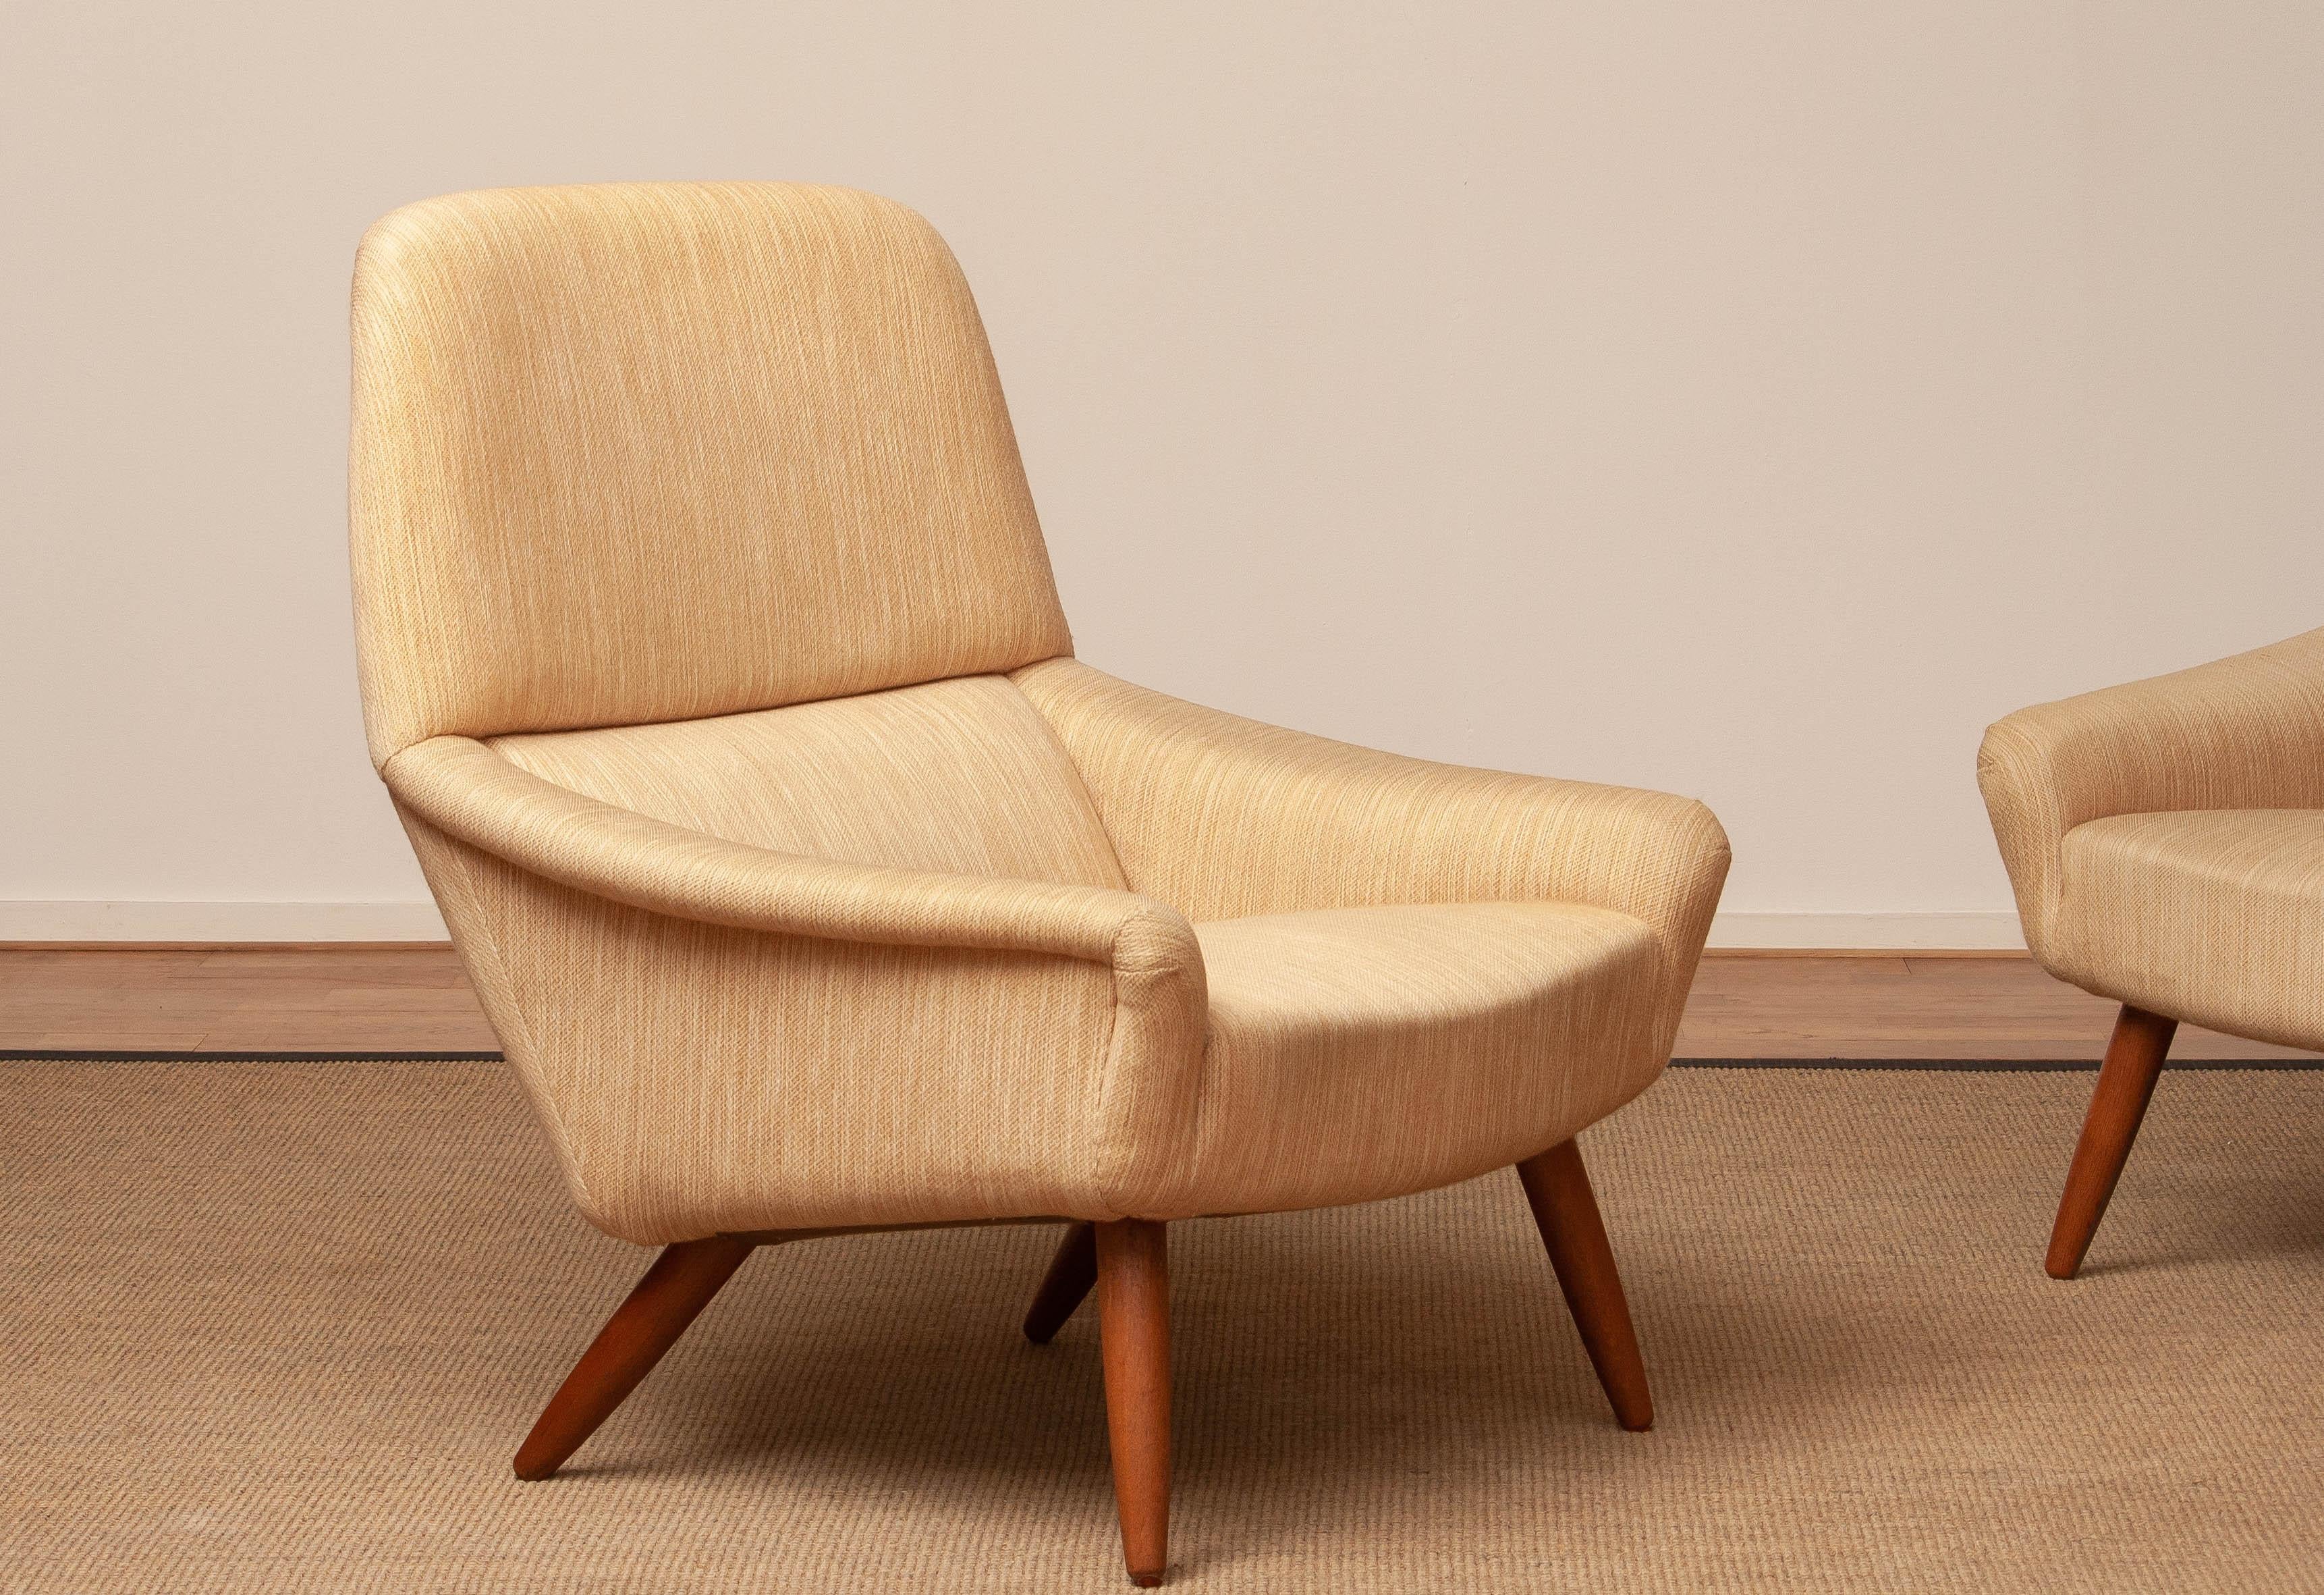 1960s Pair Wool and Oak Lounge Chairs by Leif Hansen for Kronen in Denmark For Sale 4